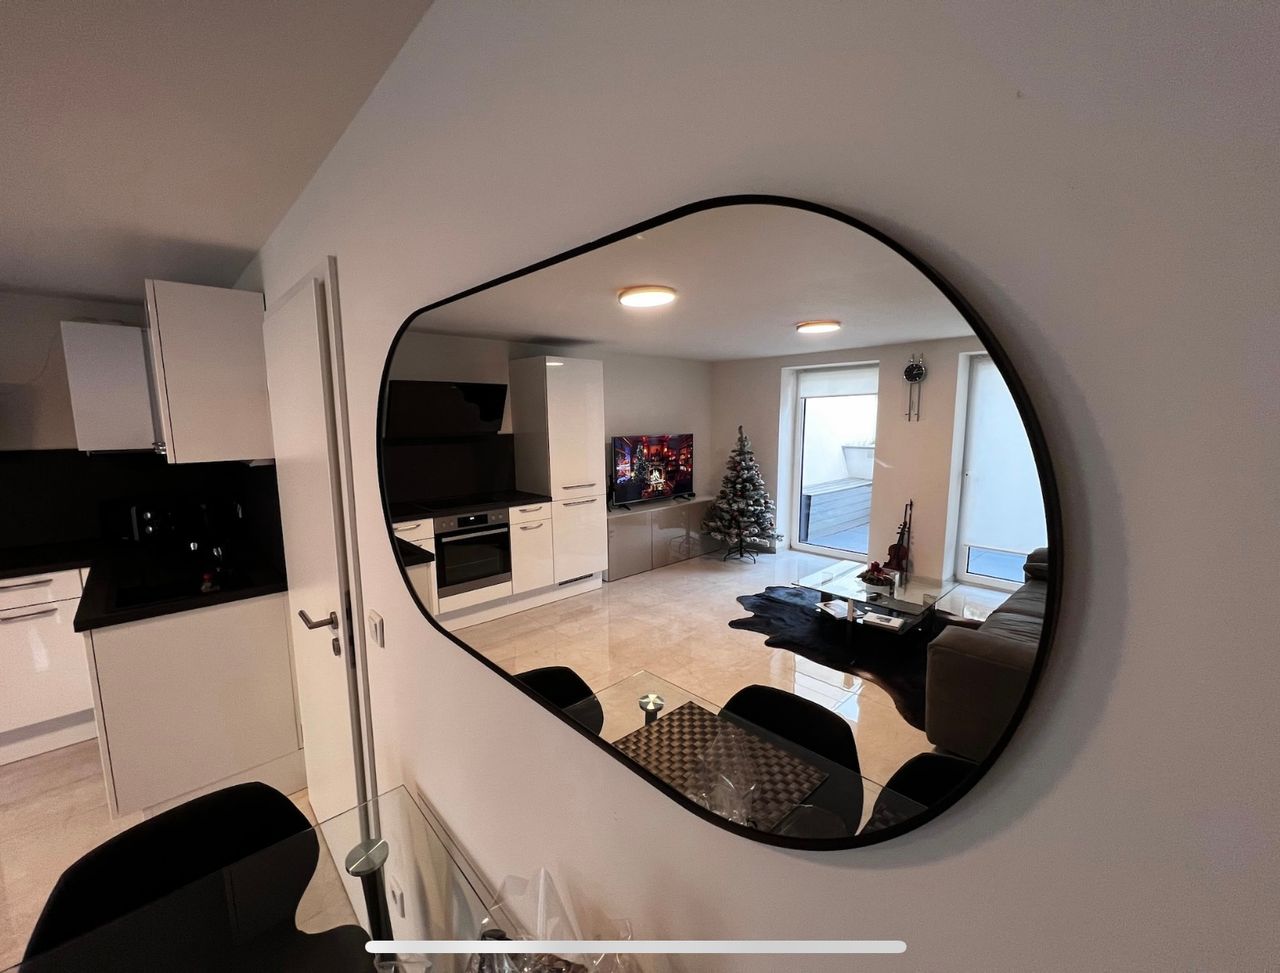 Awesome apartment located in Düsseldorf